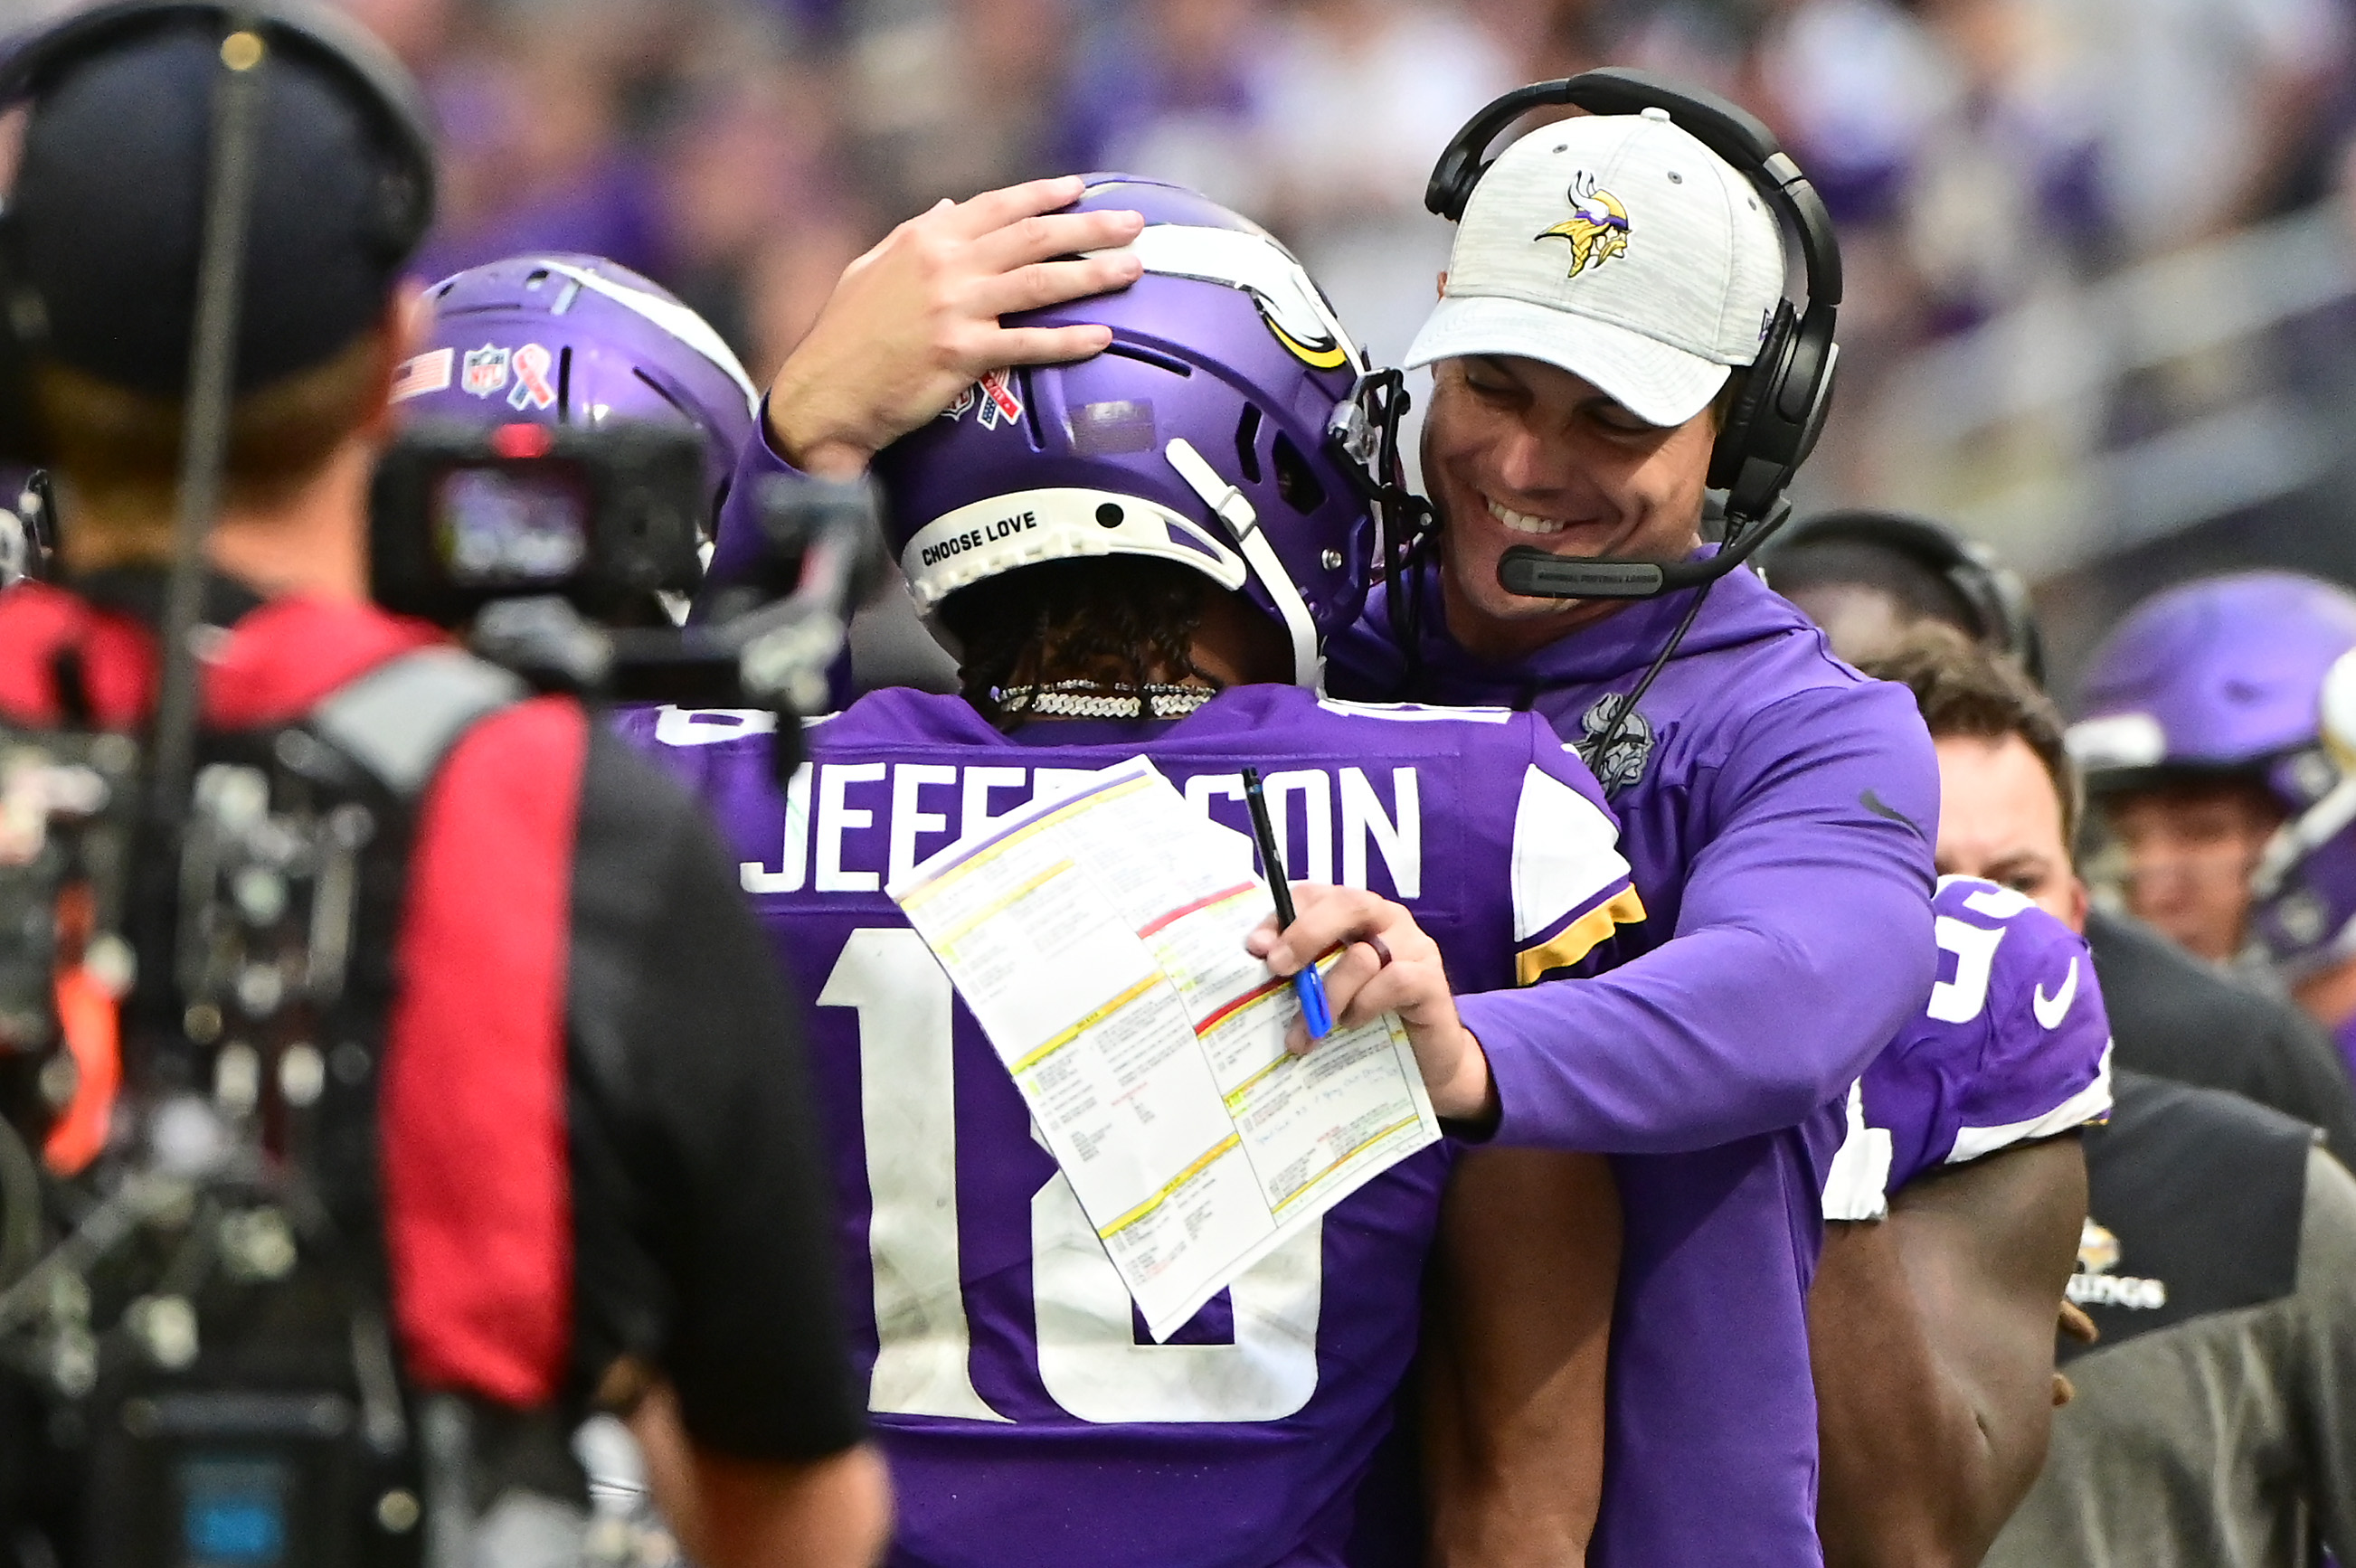 Vikings beat Packers as Justin Jefferson has career day in new offense